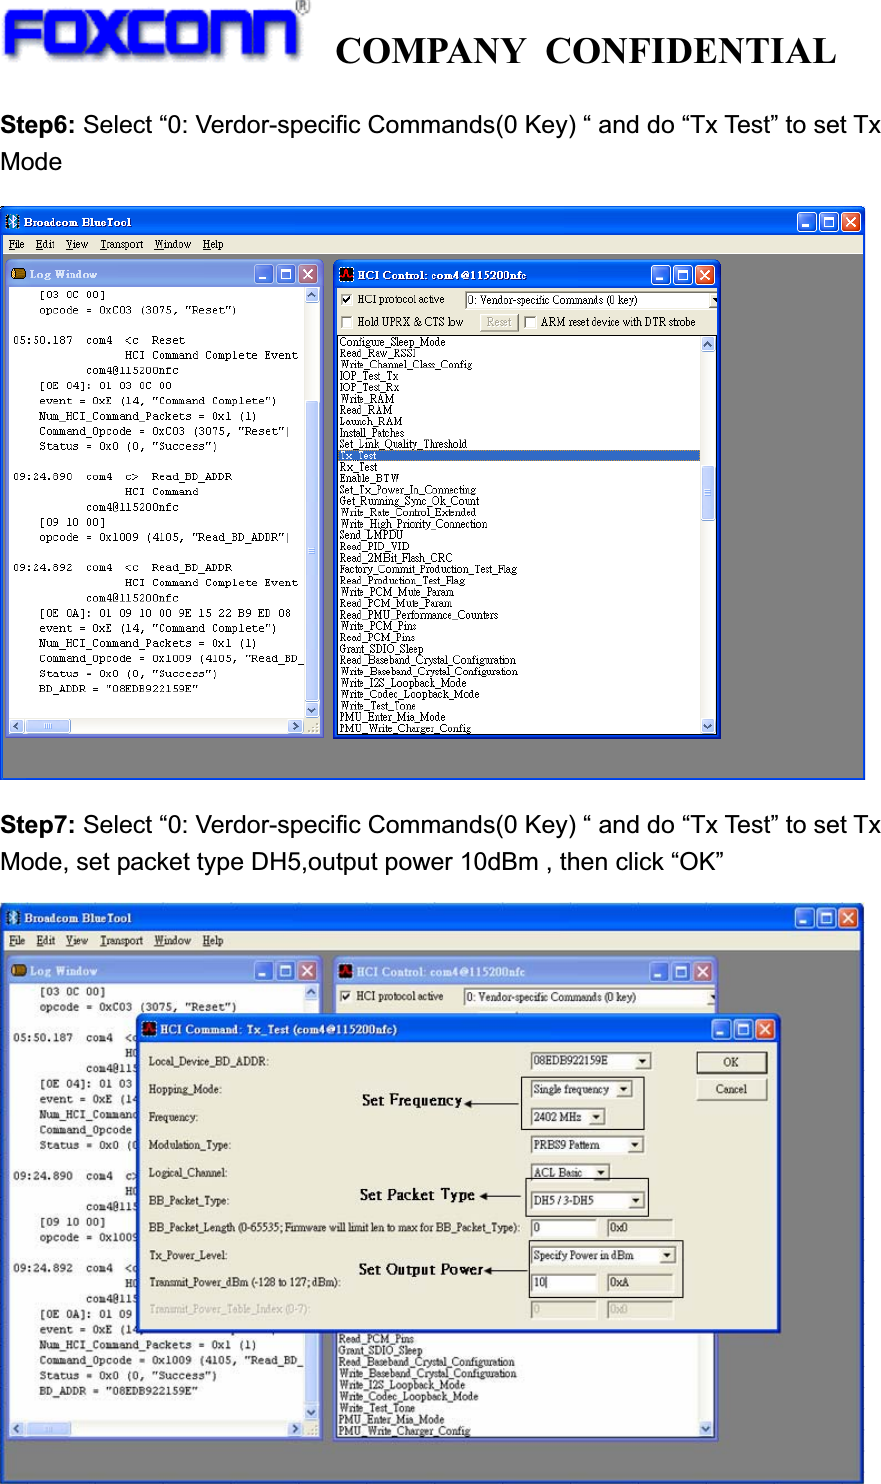   COMPANY CONFIDENTIAL             Step6: Select “0: Verdor-specific Commands(0 Key) “ and do “Tx Test” to set Tx ModeStep7: Select “0: Verdor-specific Commands(0 Key) “ and do “Tx Test” to set Tx Mode, set packet type DH5,output power 10dBm , then click “OK”  